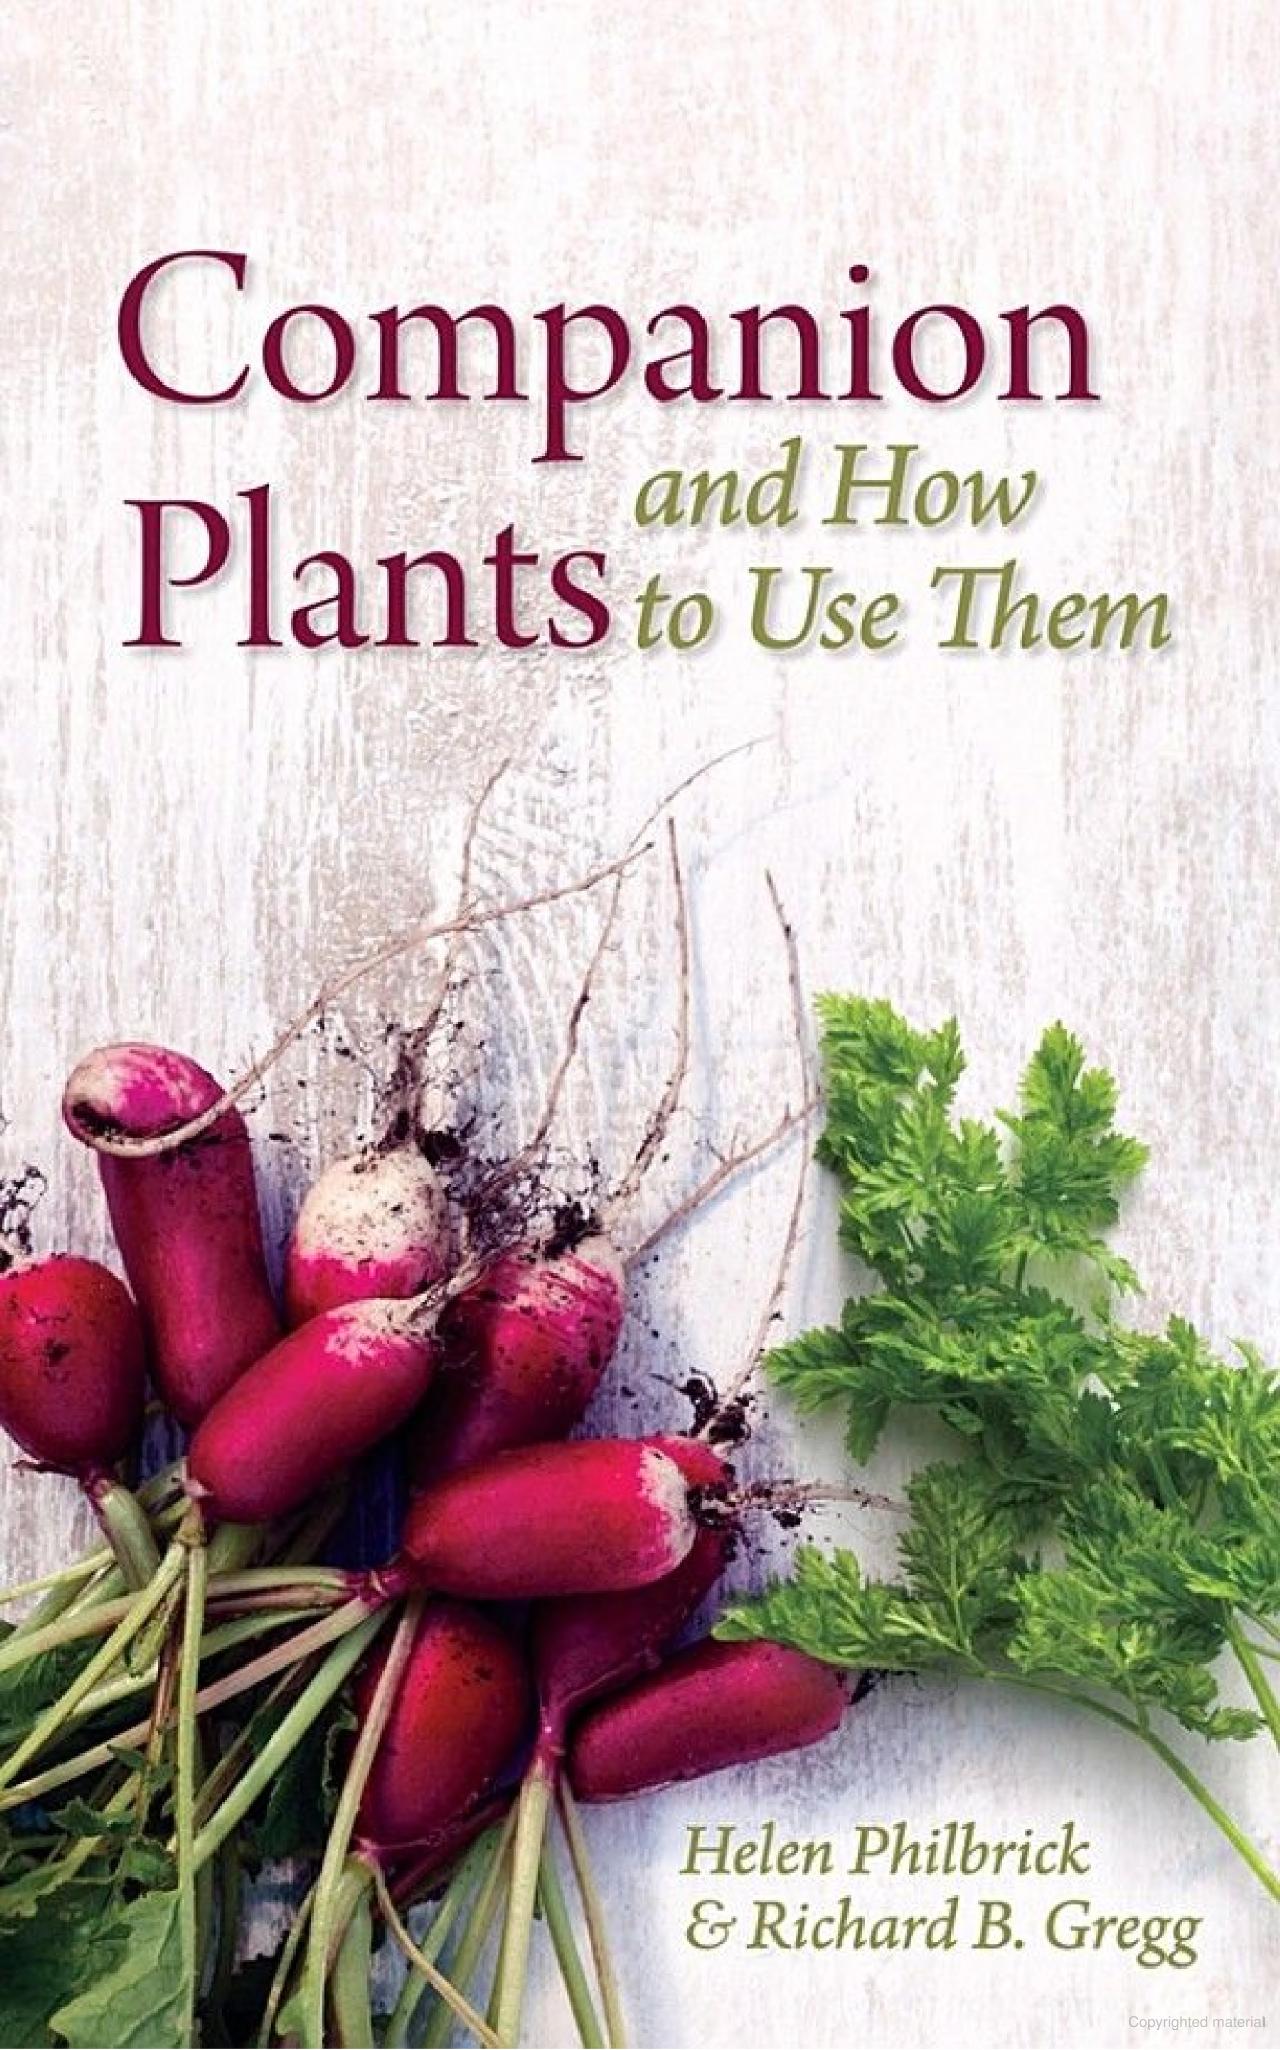 Companion Plants and How to Use Them by Helen Philbrick - The Josephine Porter Institute